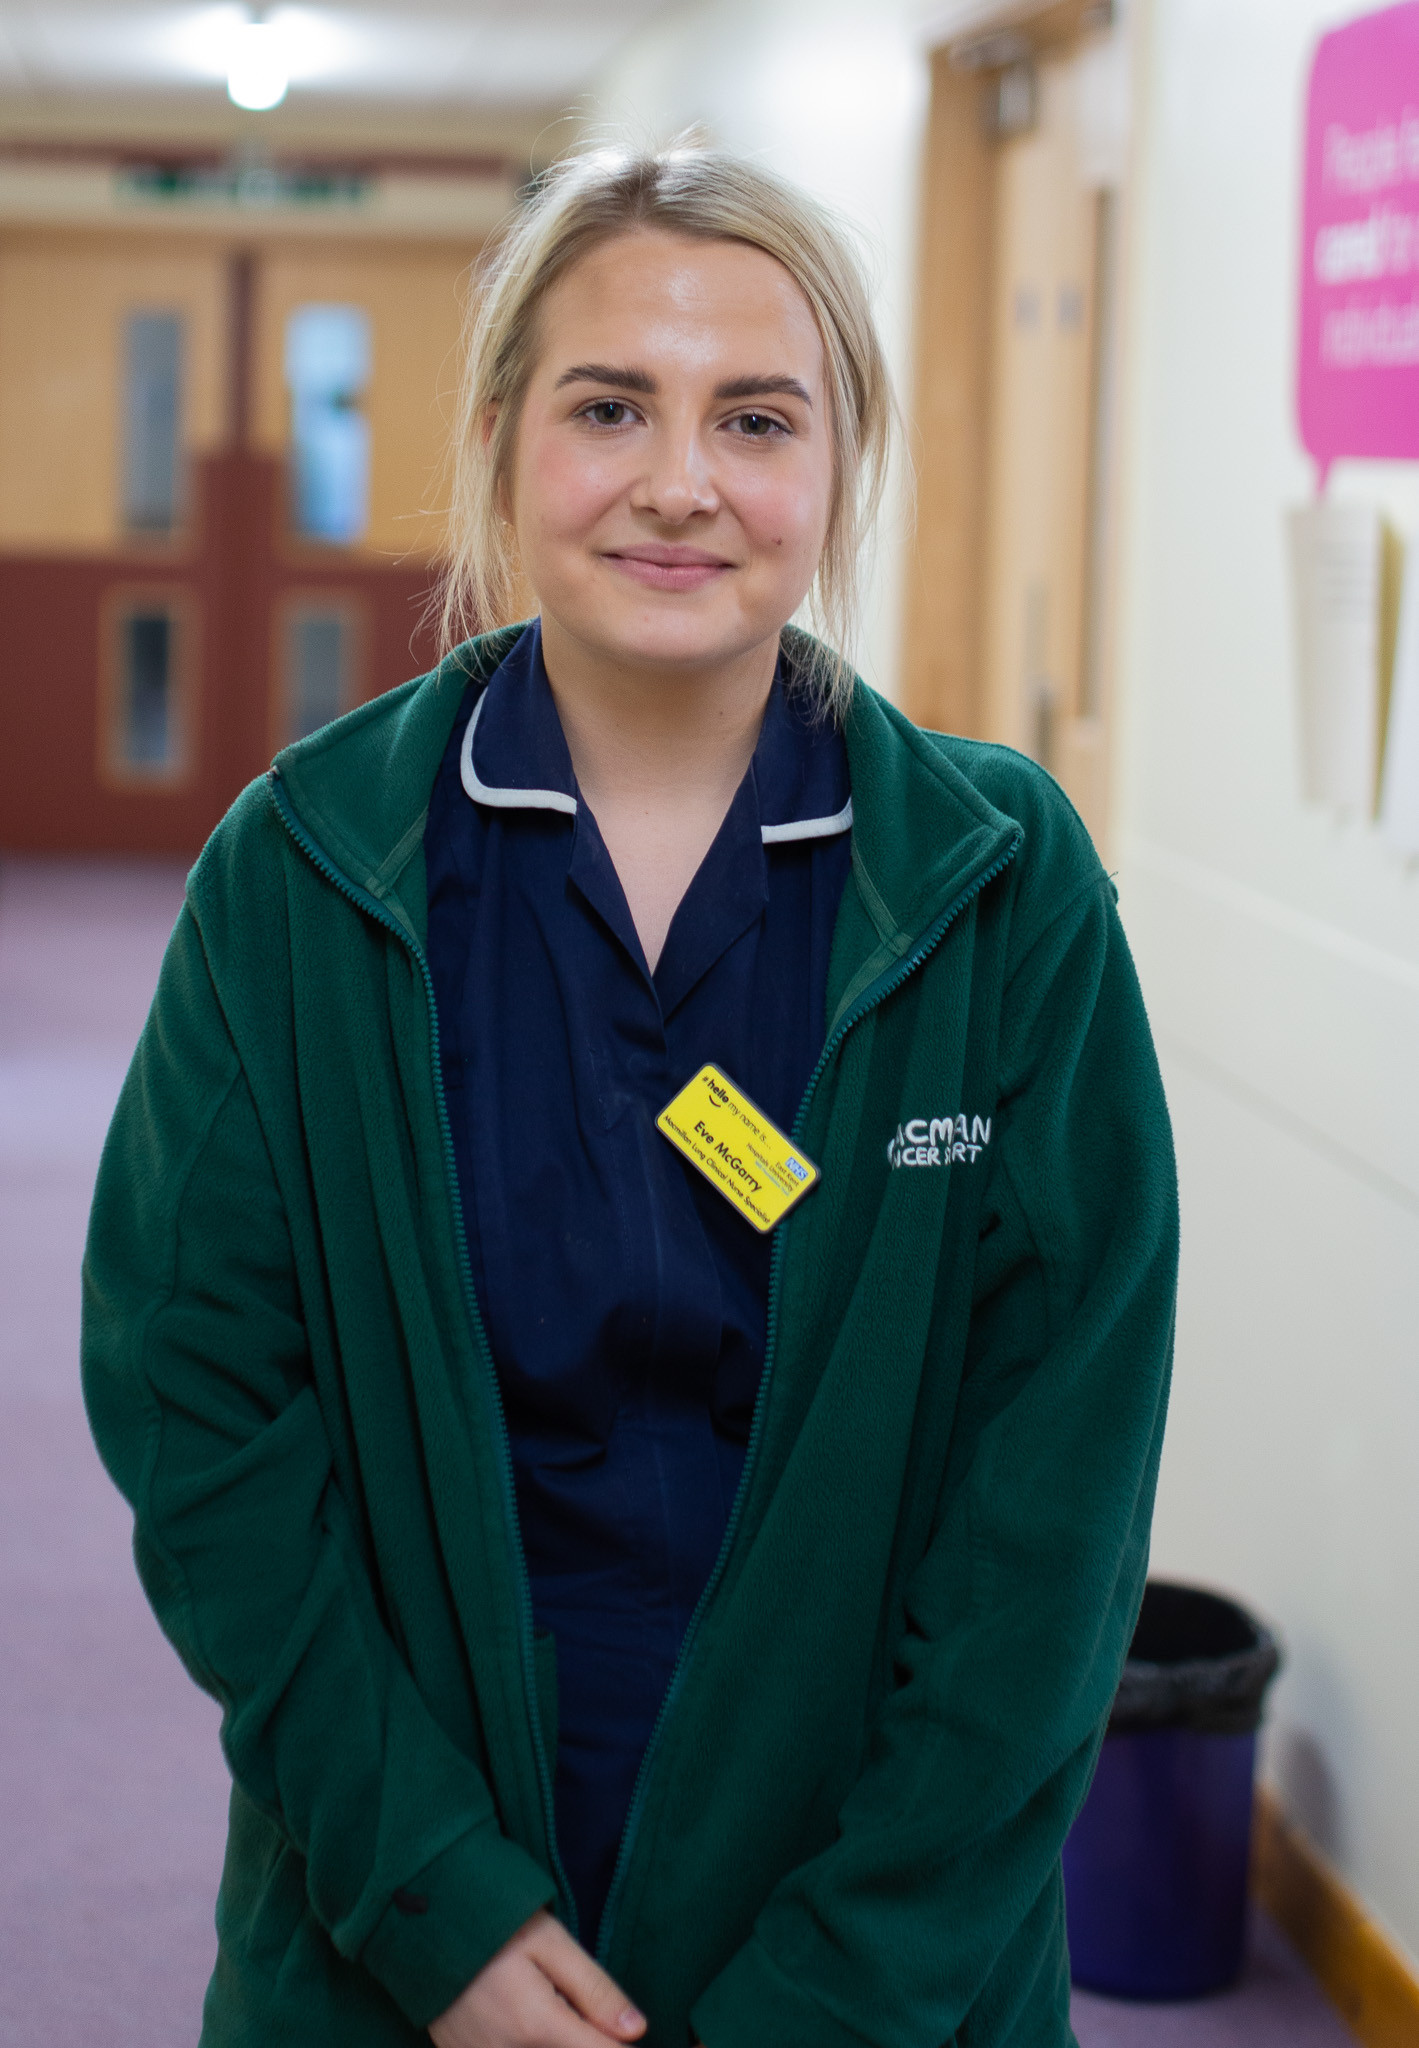 Eve McGarry, lung cancer CNS nurse. She is pictured in a corridor wearing a uniform and fleece and yellow name badge